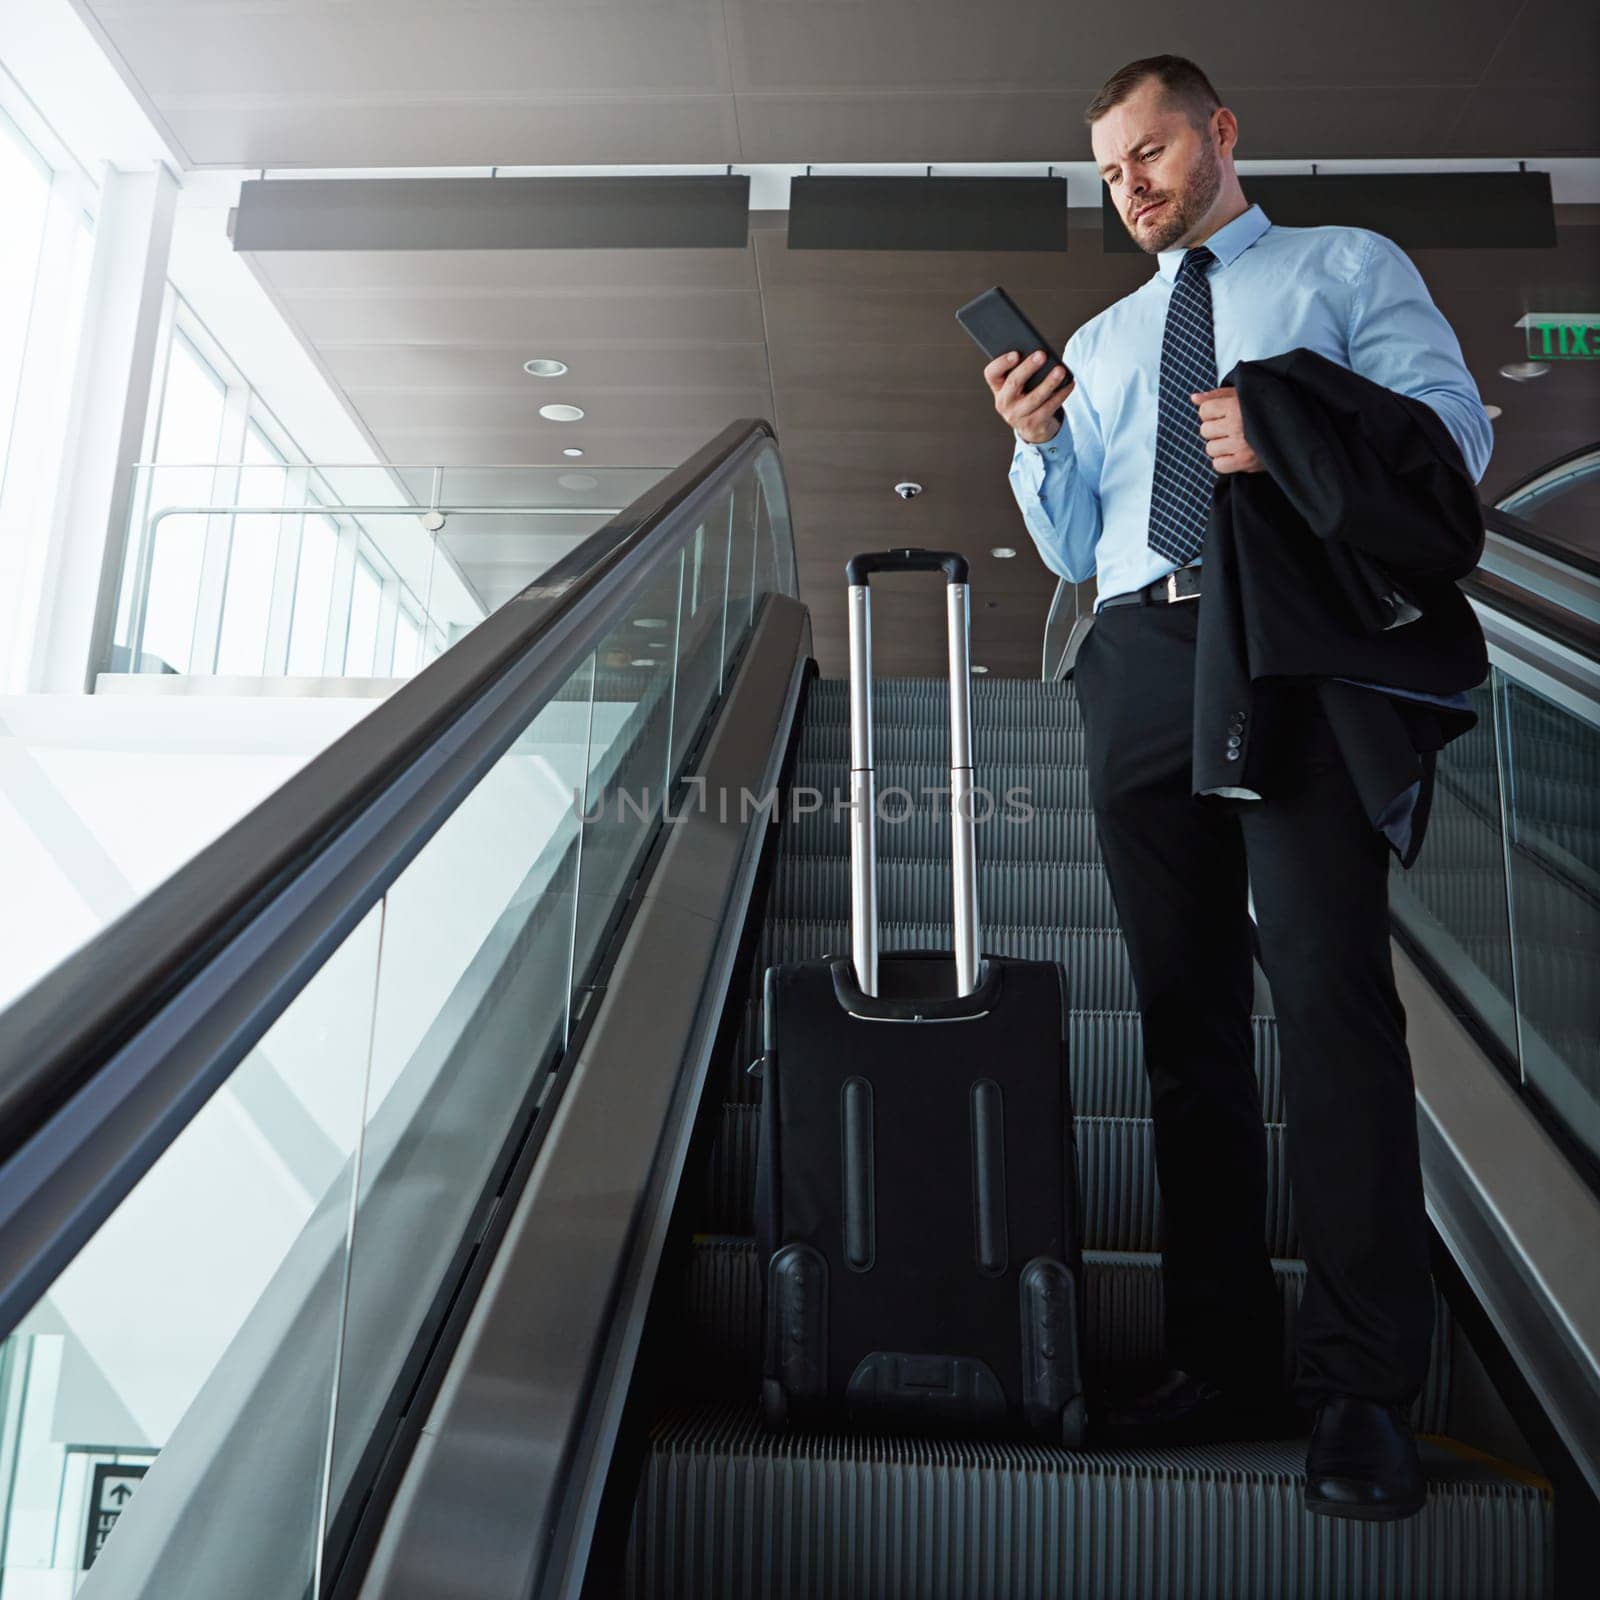 Modern business travel demands modern technology. a businessman using a mobile phone while traveling down an escalator in an airport